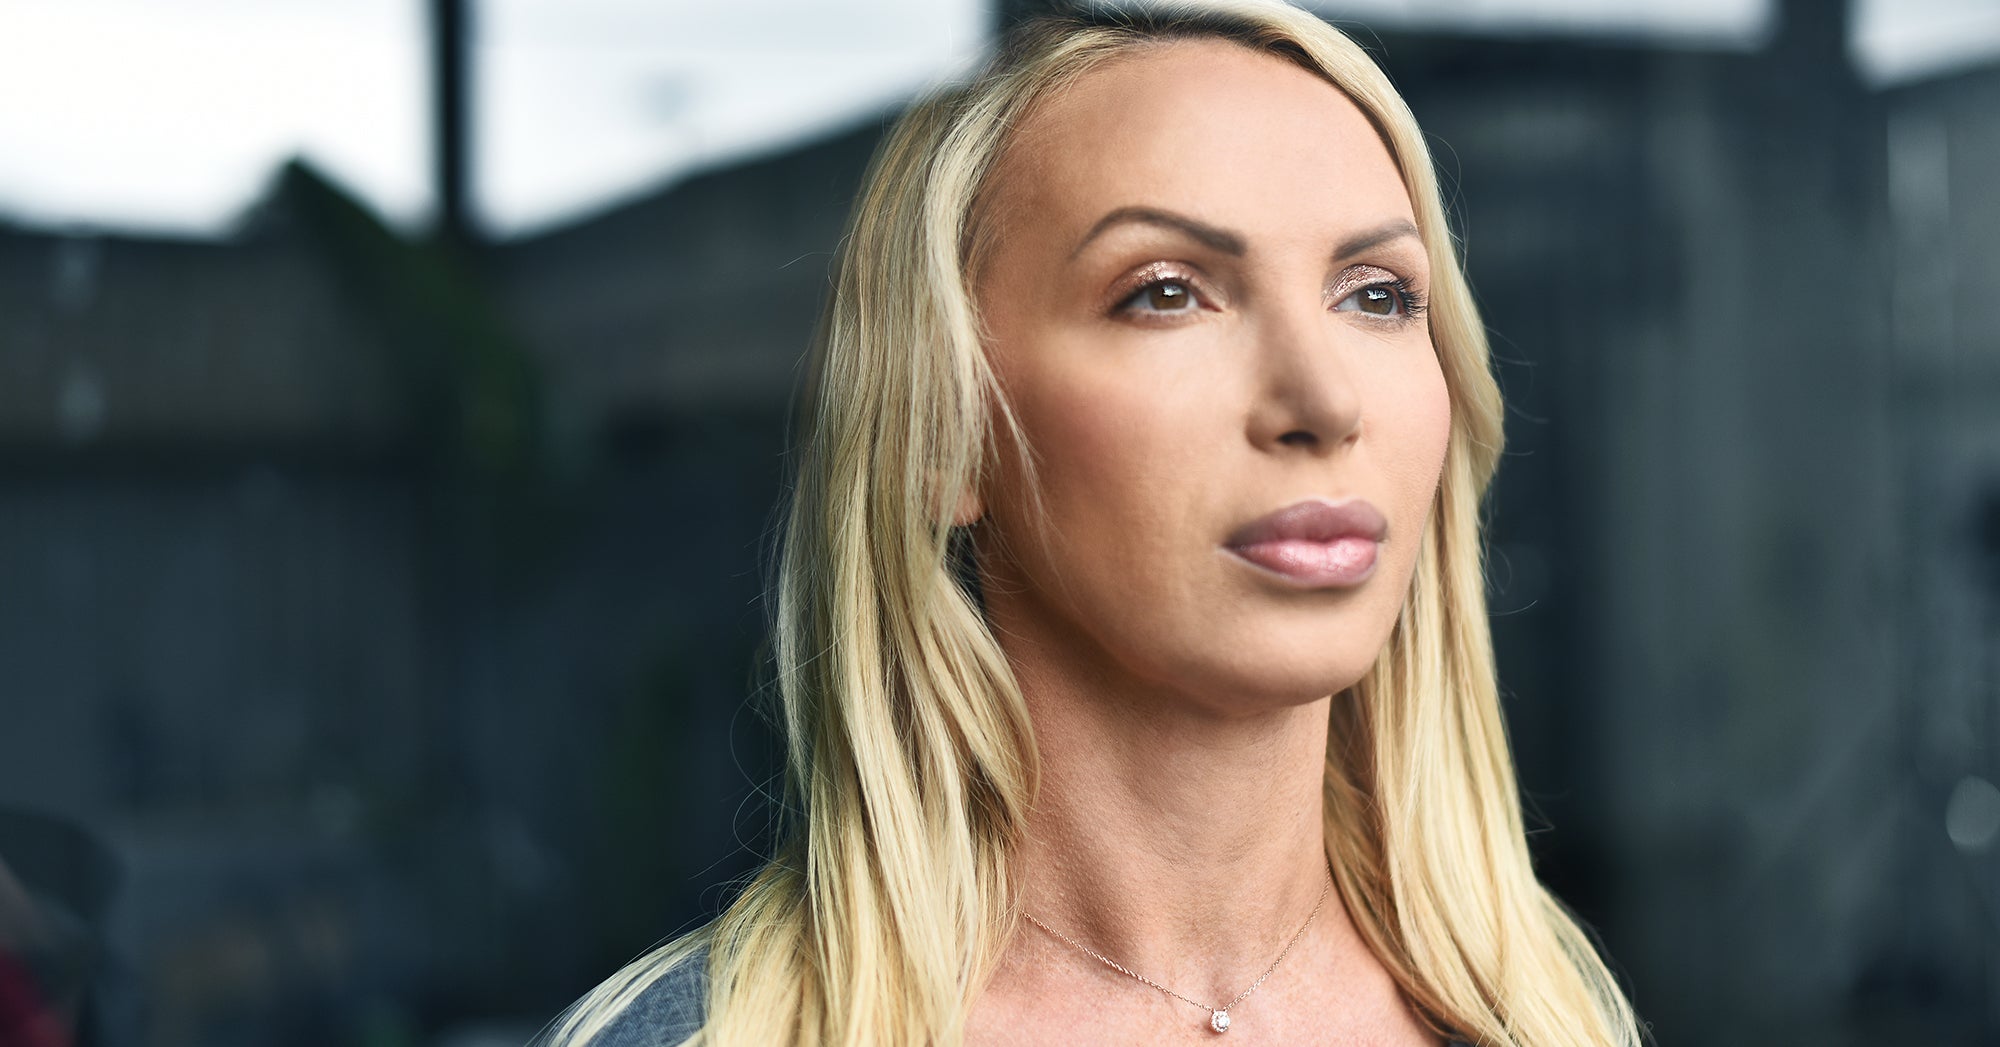 Nikki Benz Onlyfans Videos - This Woman Says Authorities Doubted Her Sexual Assault Claim ...